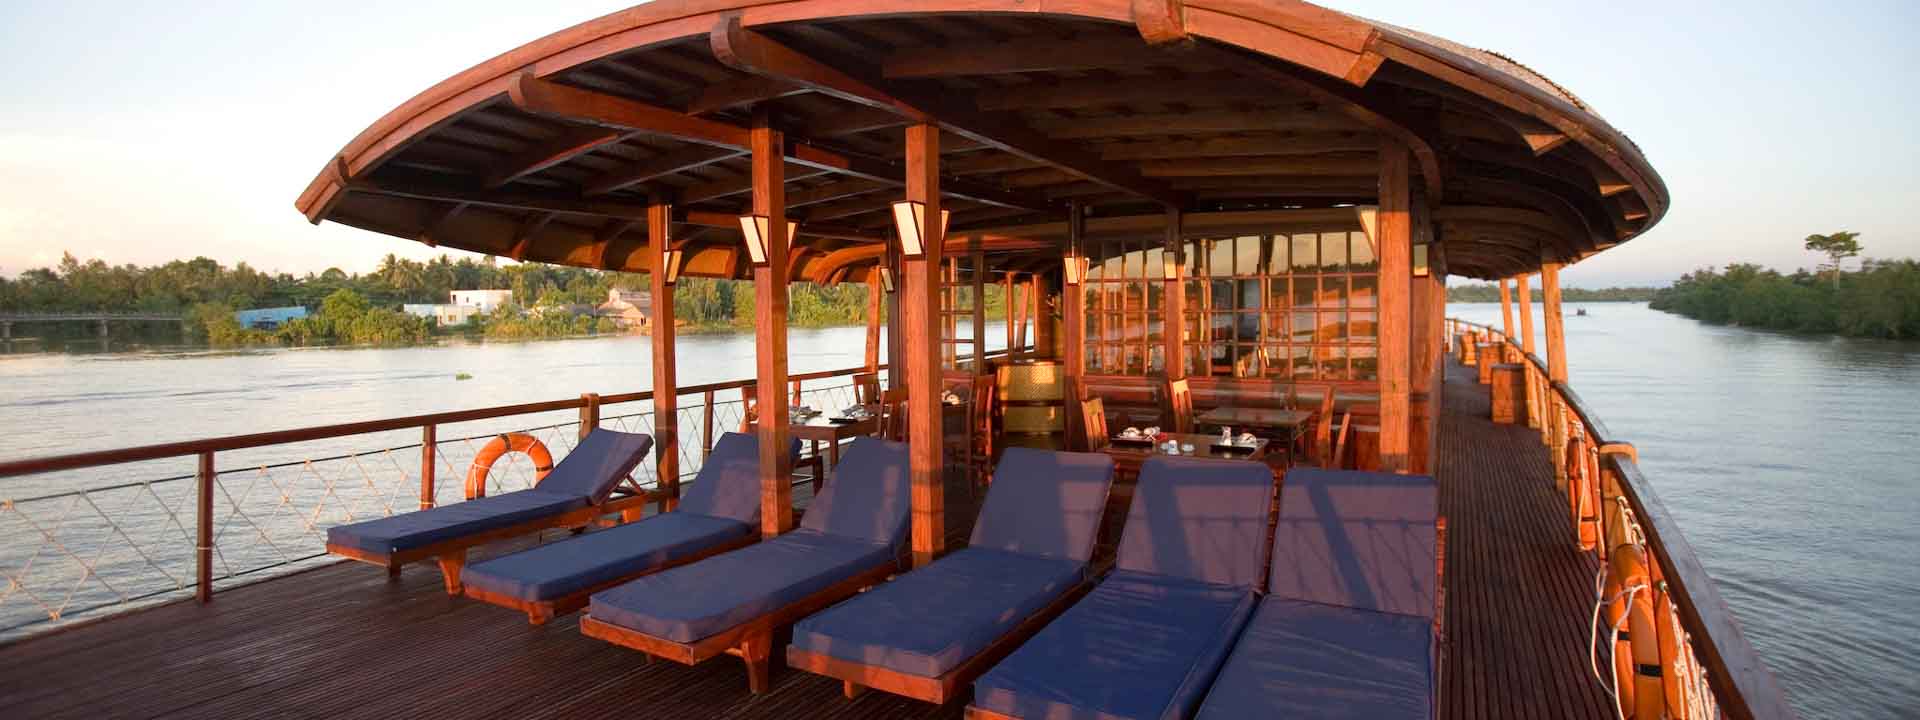 Scenic Victoria Boat Cruise Mekong 4 days